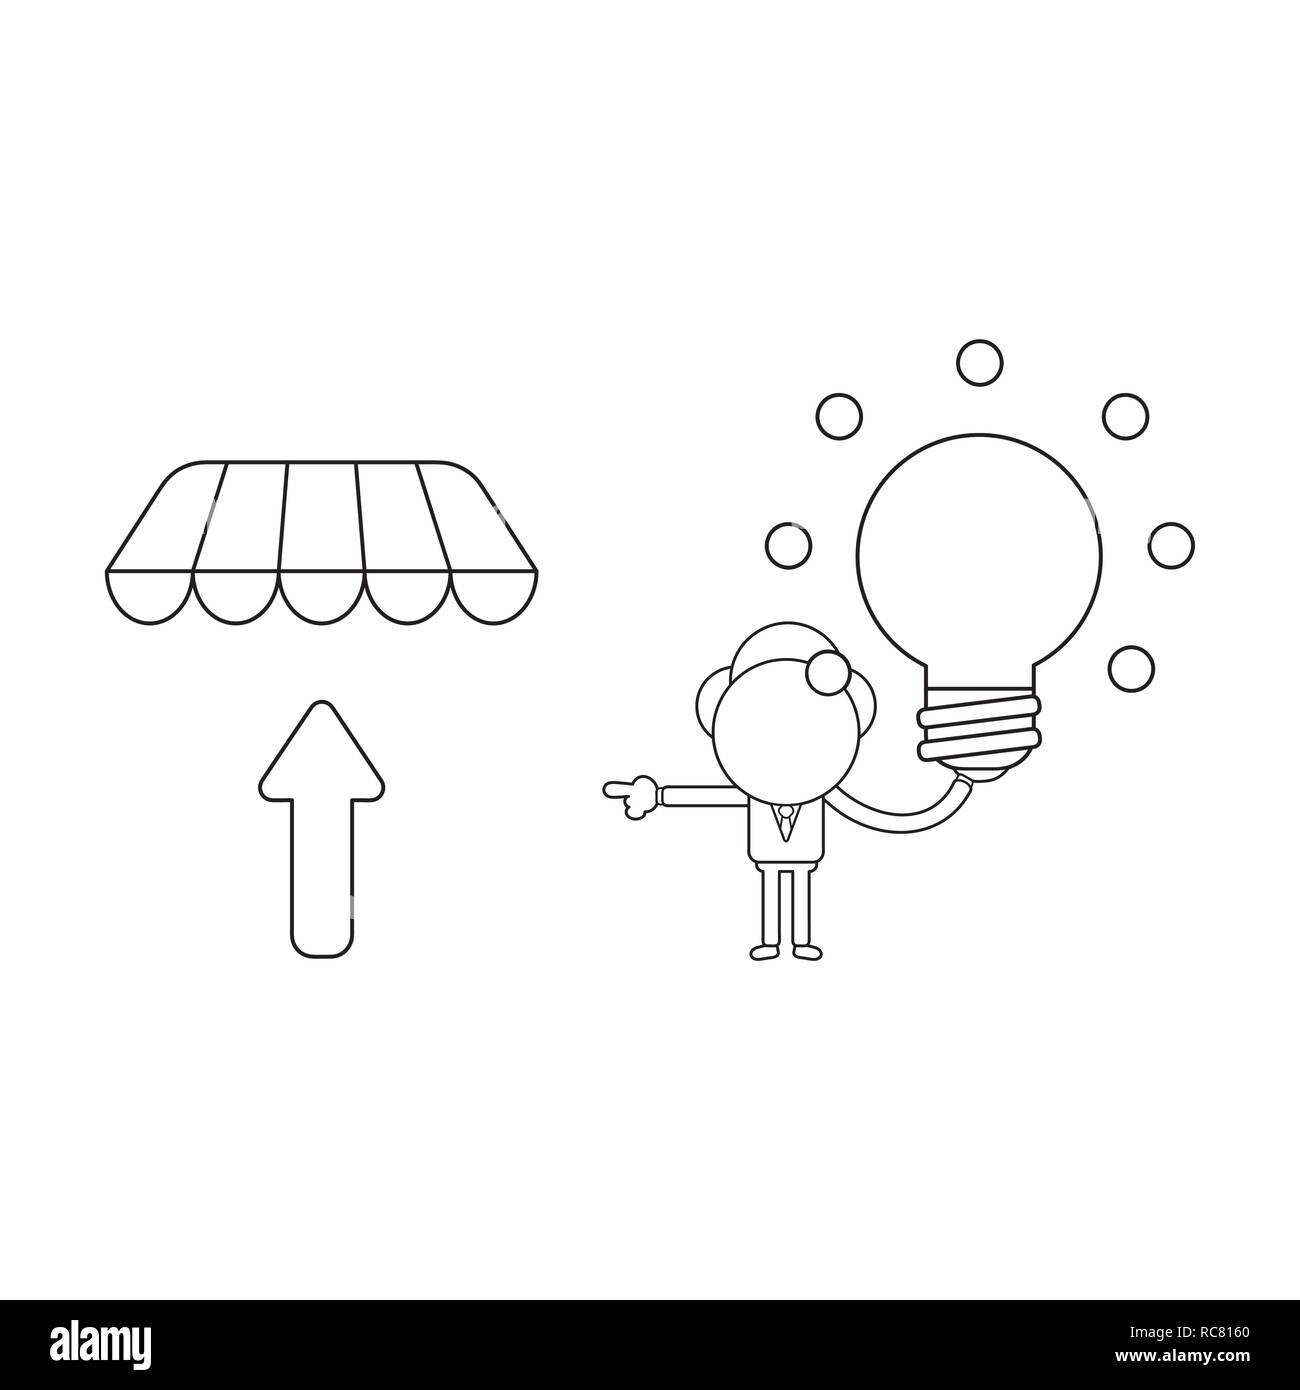 Vector illustration concept of businessman character holding glowing light bulb and pointing arrow up under store awning. Black outline. Stock Vector